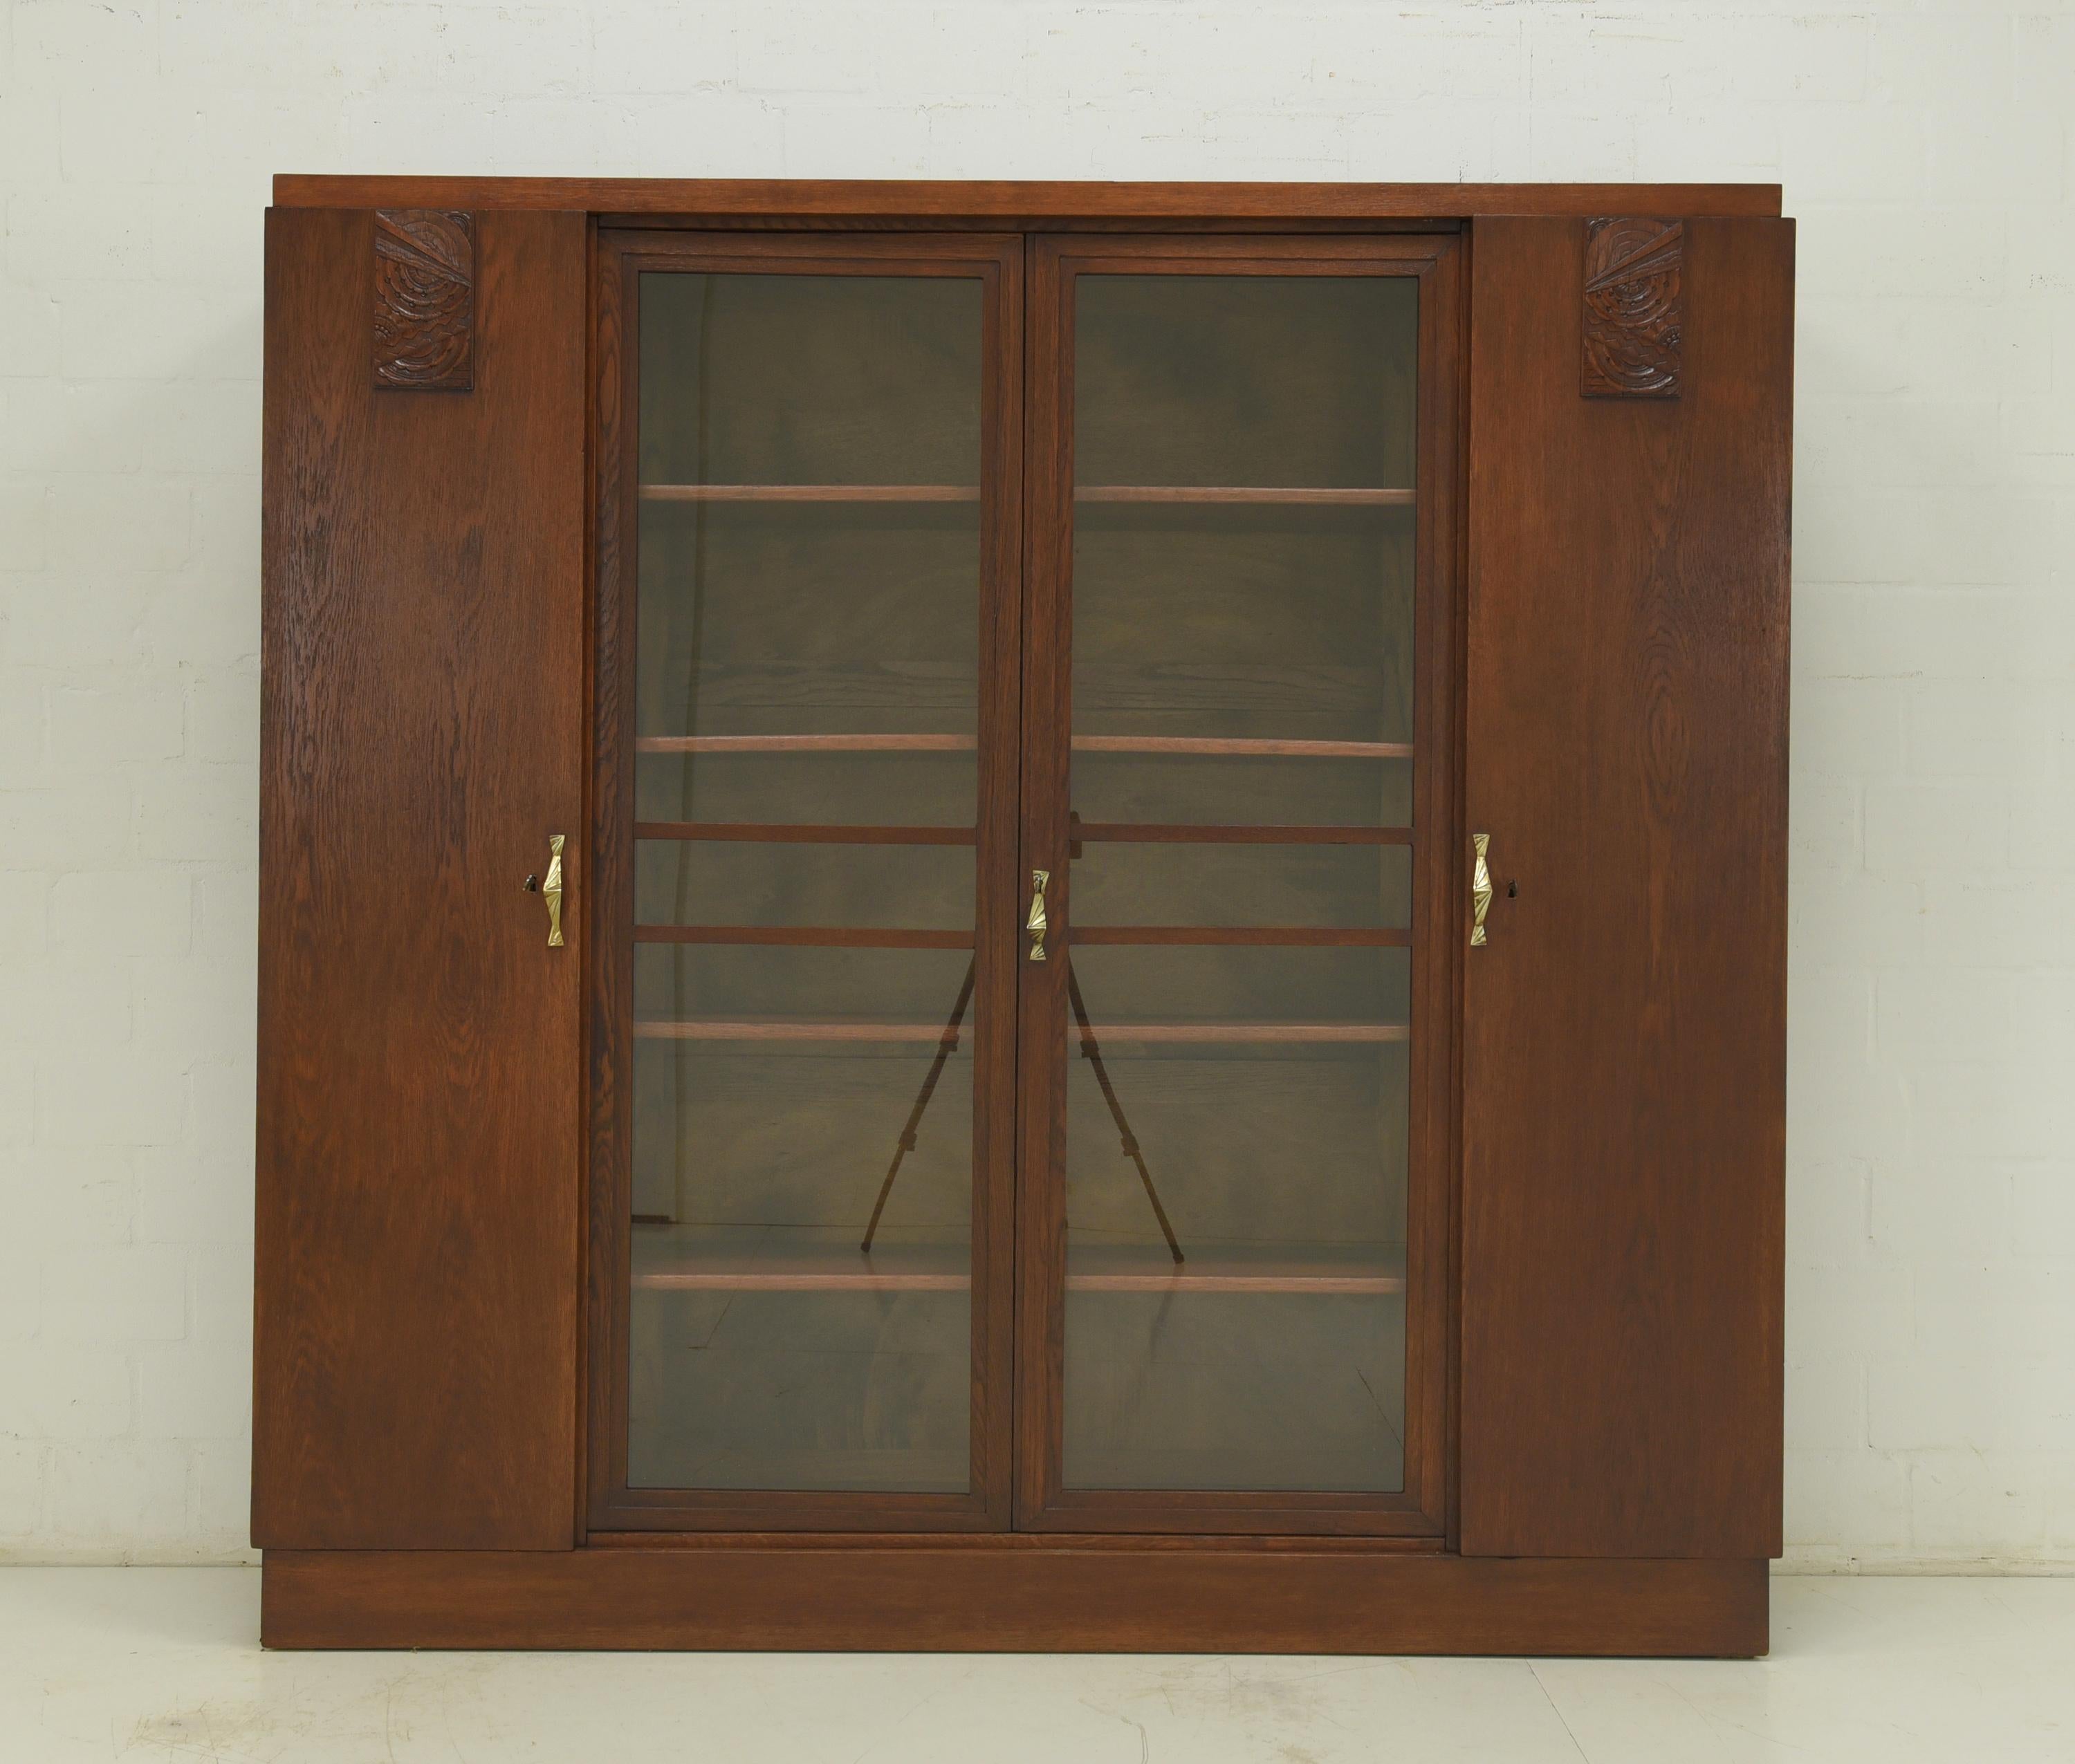 Large bookcase restored Art Deco circa 1925 oak display cabinet

Features:
Solid oak shelves, height adjustable
Original fittings
Original rod locks
Subtle, abstract carving applications
Reduced, geometric Art Deco design
Timeless